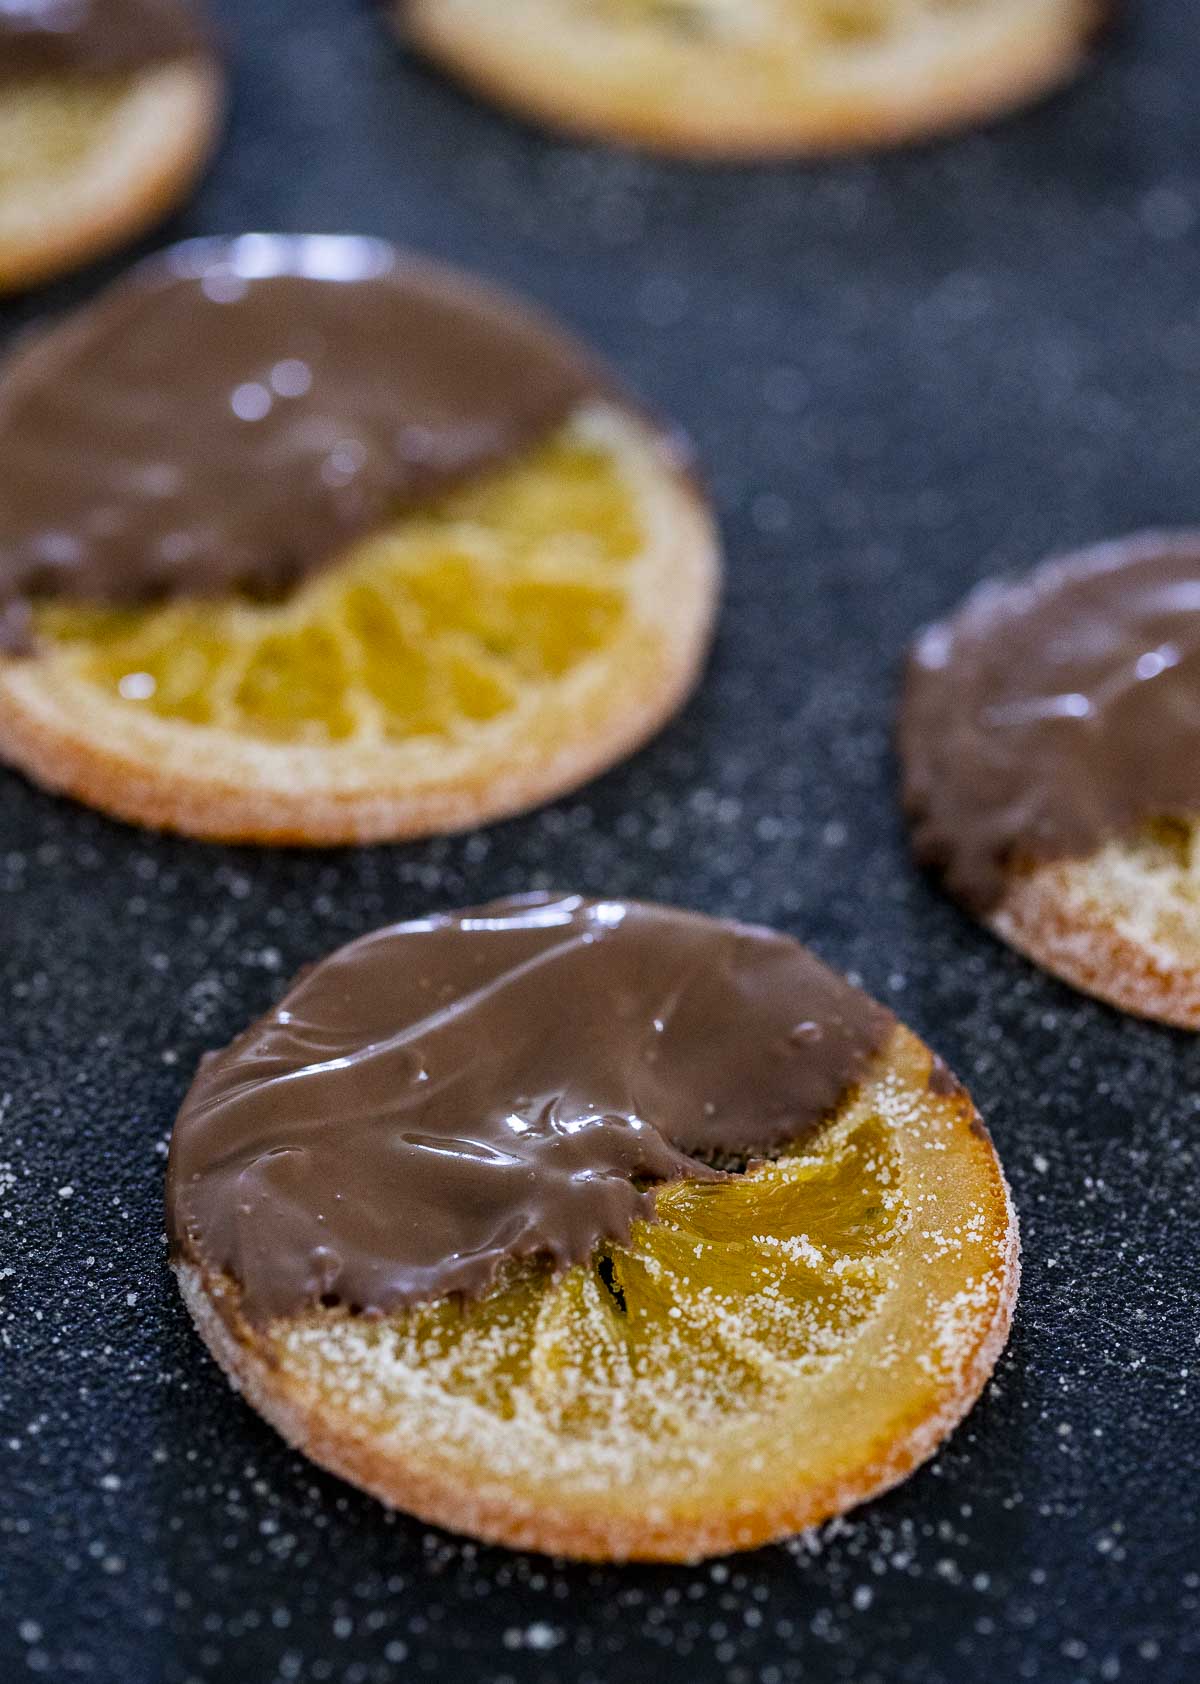 Chocolate dipped orange slices arranged flat to dry.